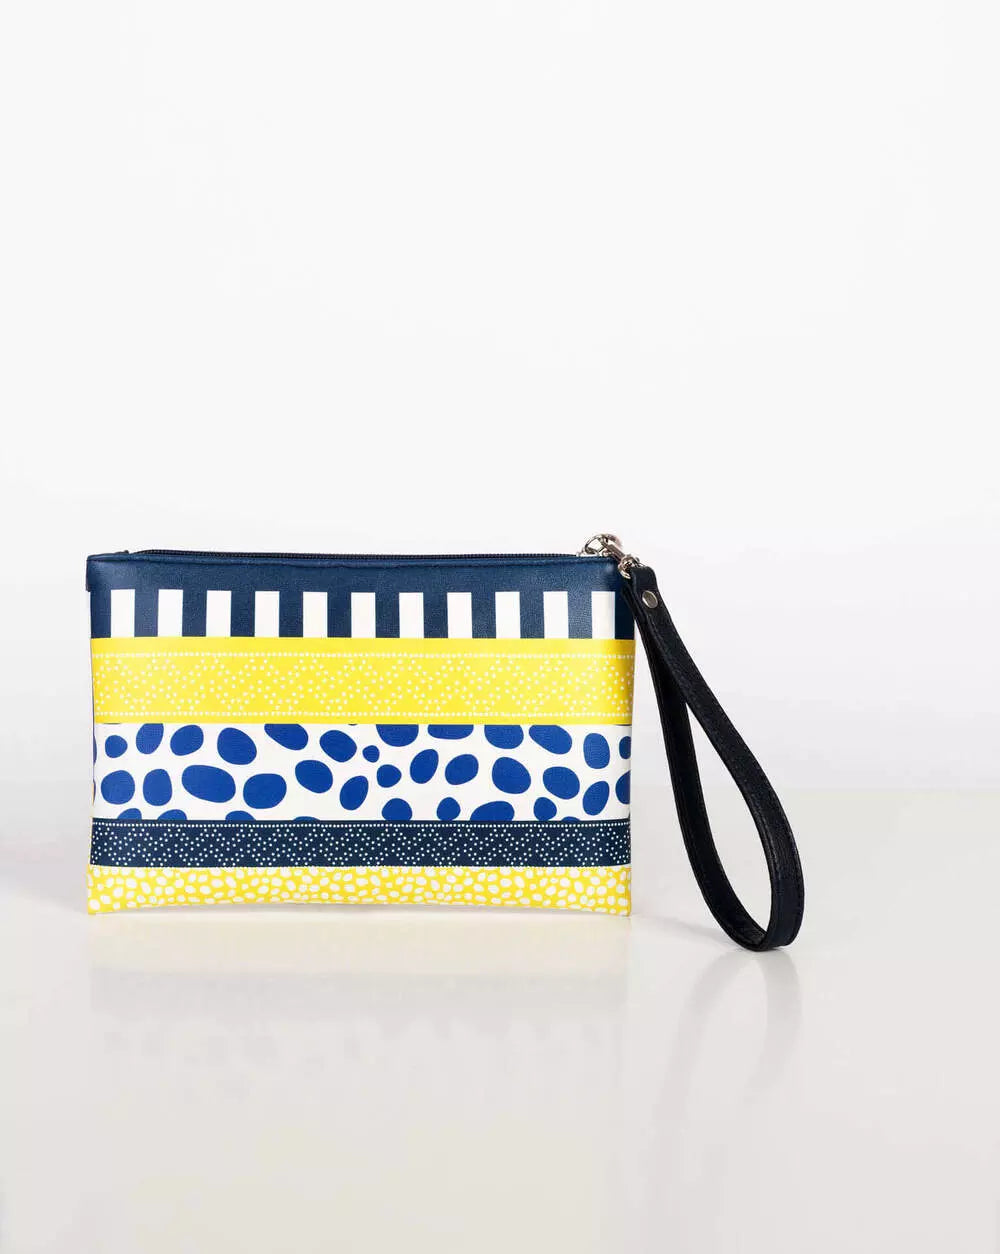 Forever is Boring Hop Pebbles YL Clutch back with four stripes, one in dark blue with horizontal white rectangles, one in yellow with small white dots, one in white with big blue spots, one in blue with white spots in zigzag and one yellow with big white dots.